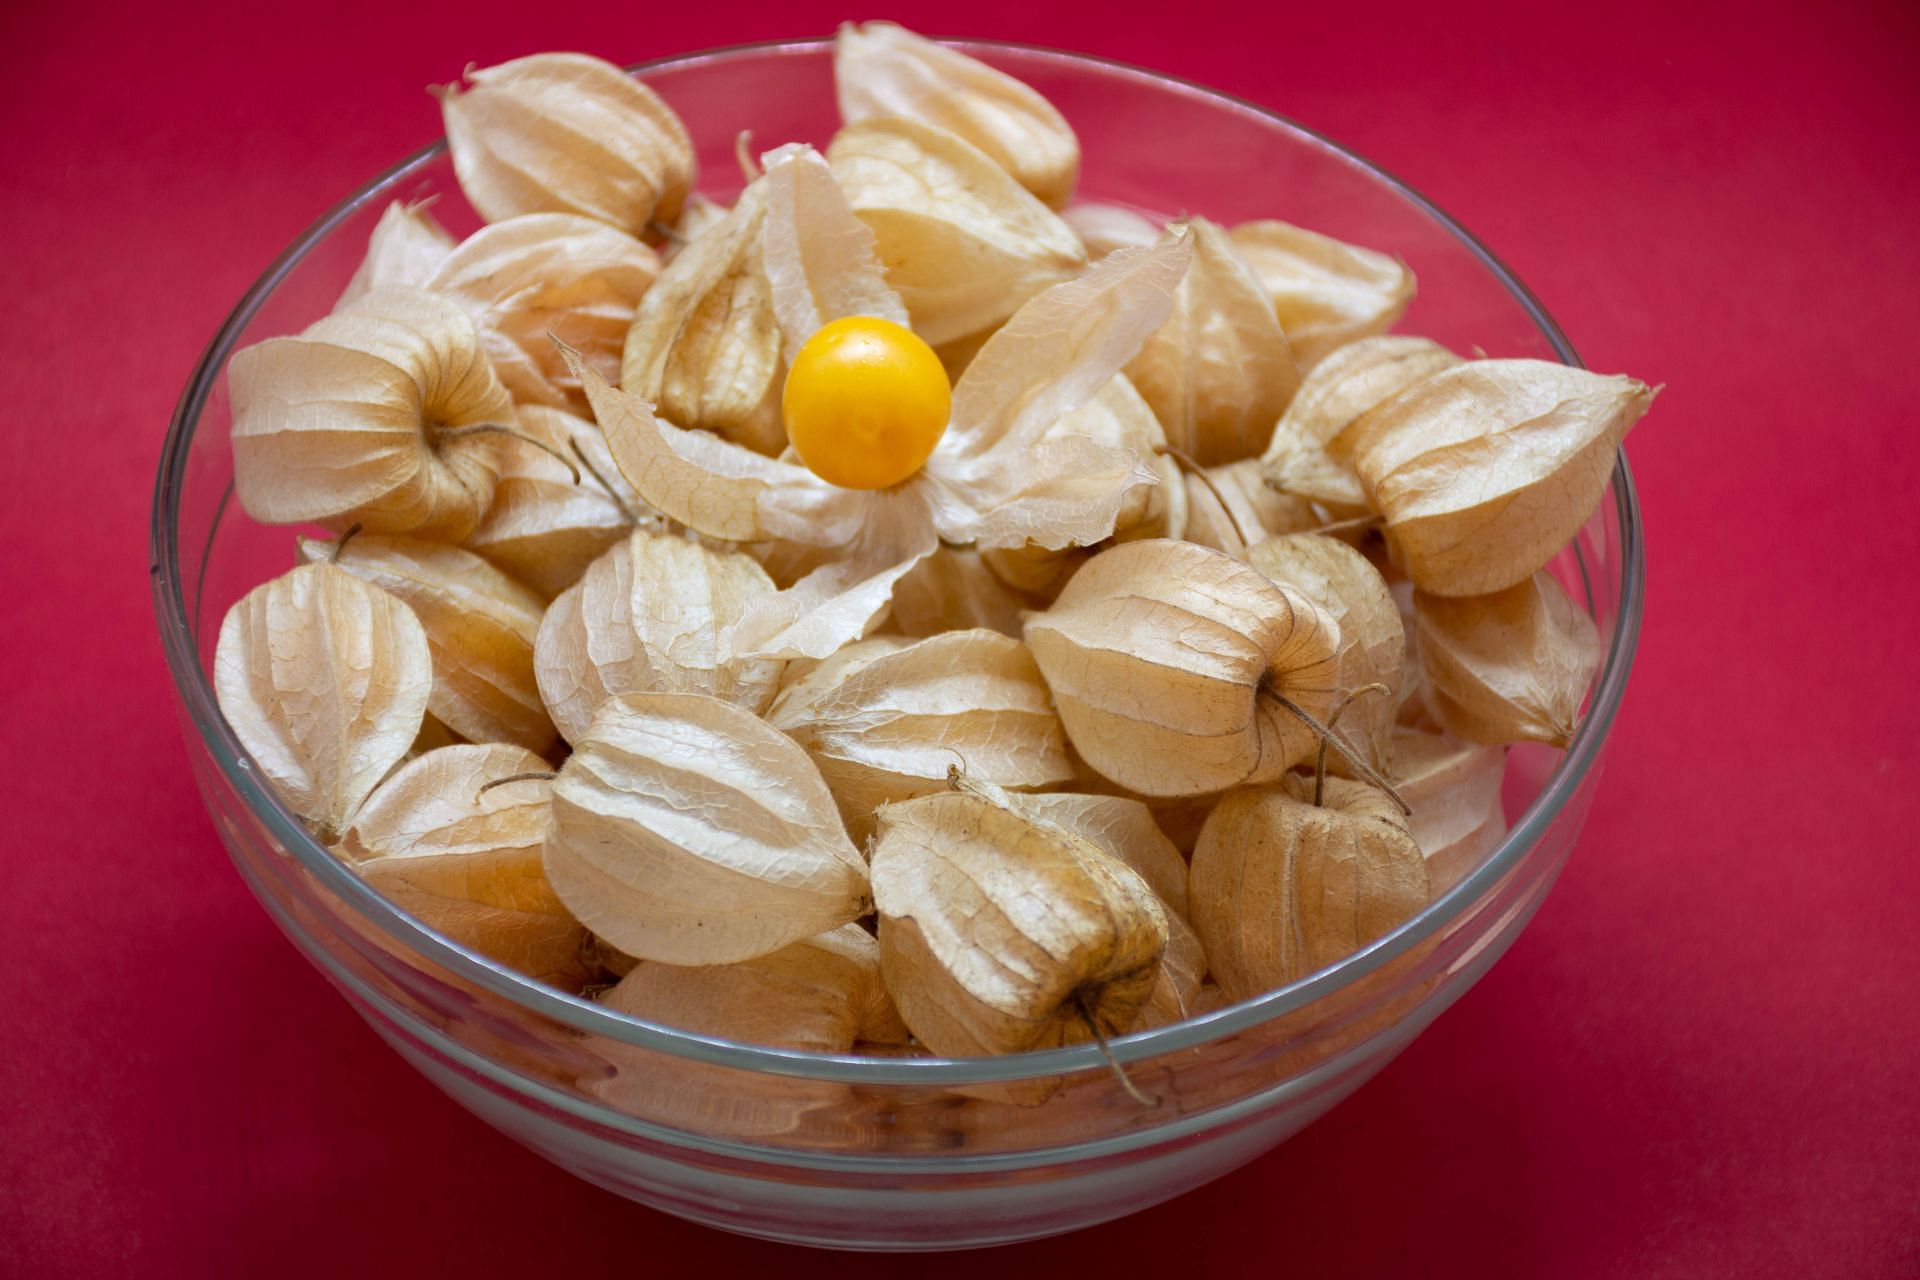 Get an energy boost with Physalis&#039; carbohydrates and Vitamin B complex. (Image via Pexels)